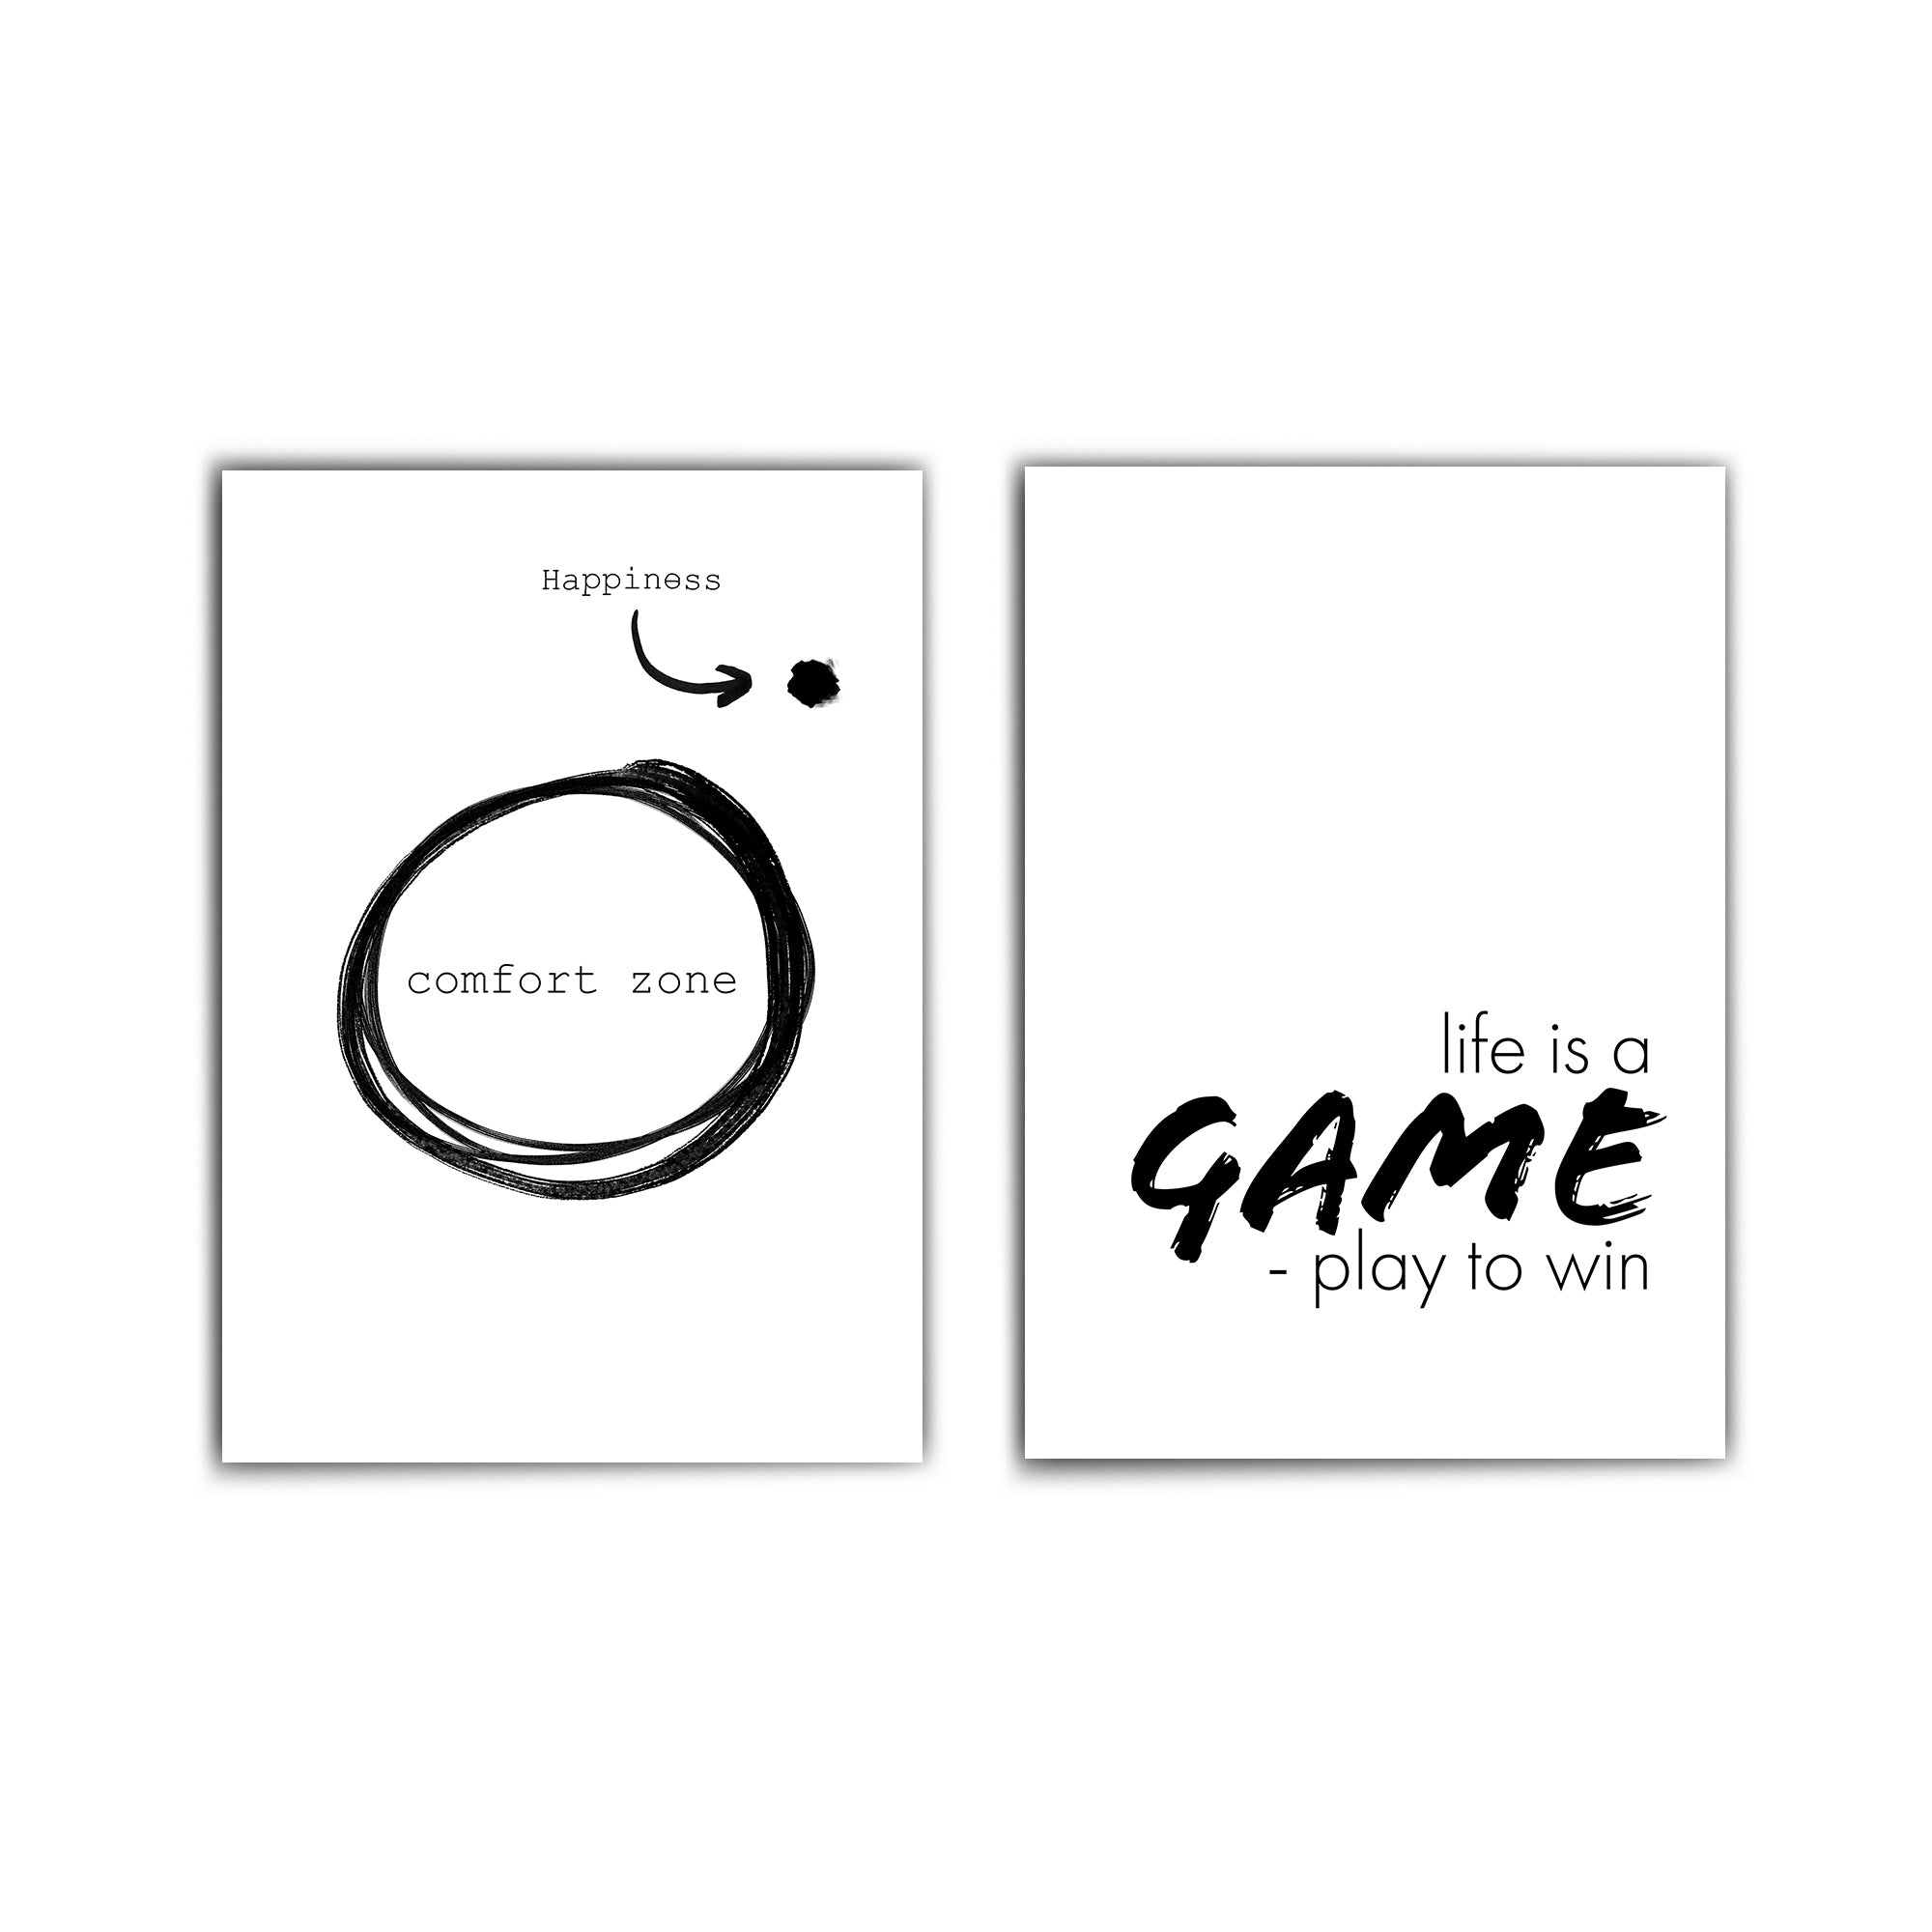 4onepictures_posterset_2_din_a4_30x40_typographie_spruch_motivation_buero_game_comfortzone_poster.jpg